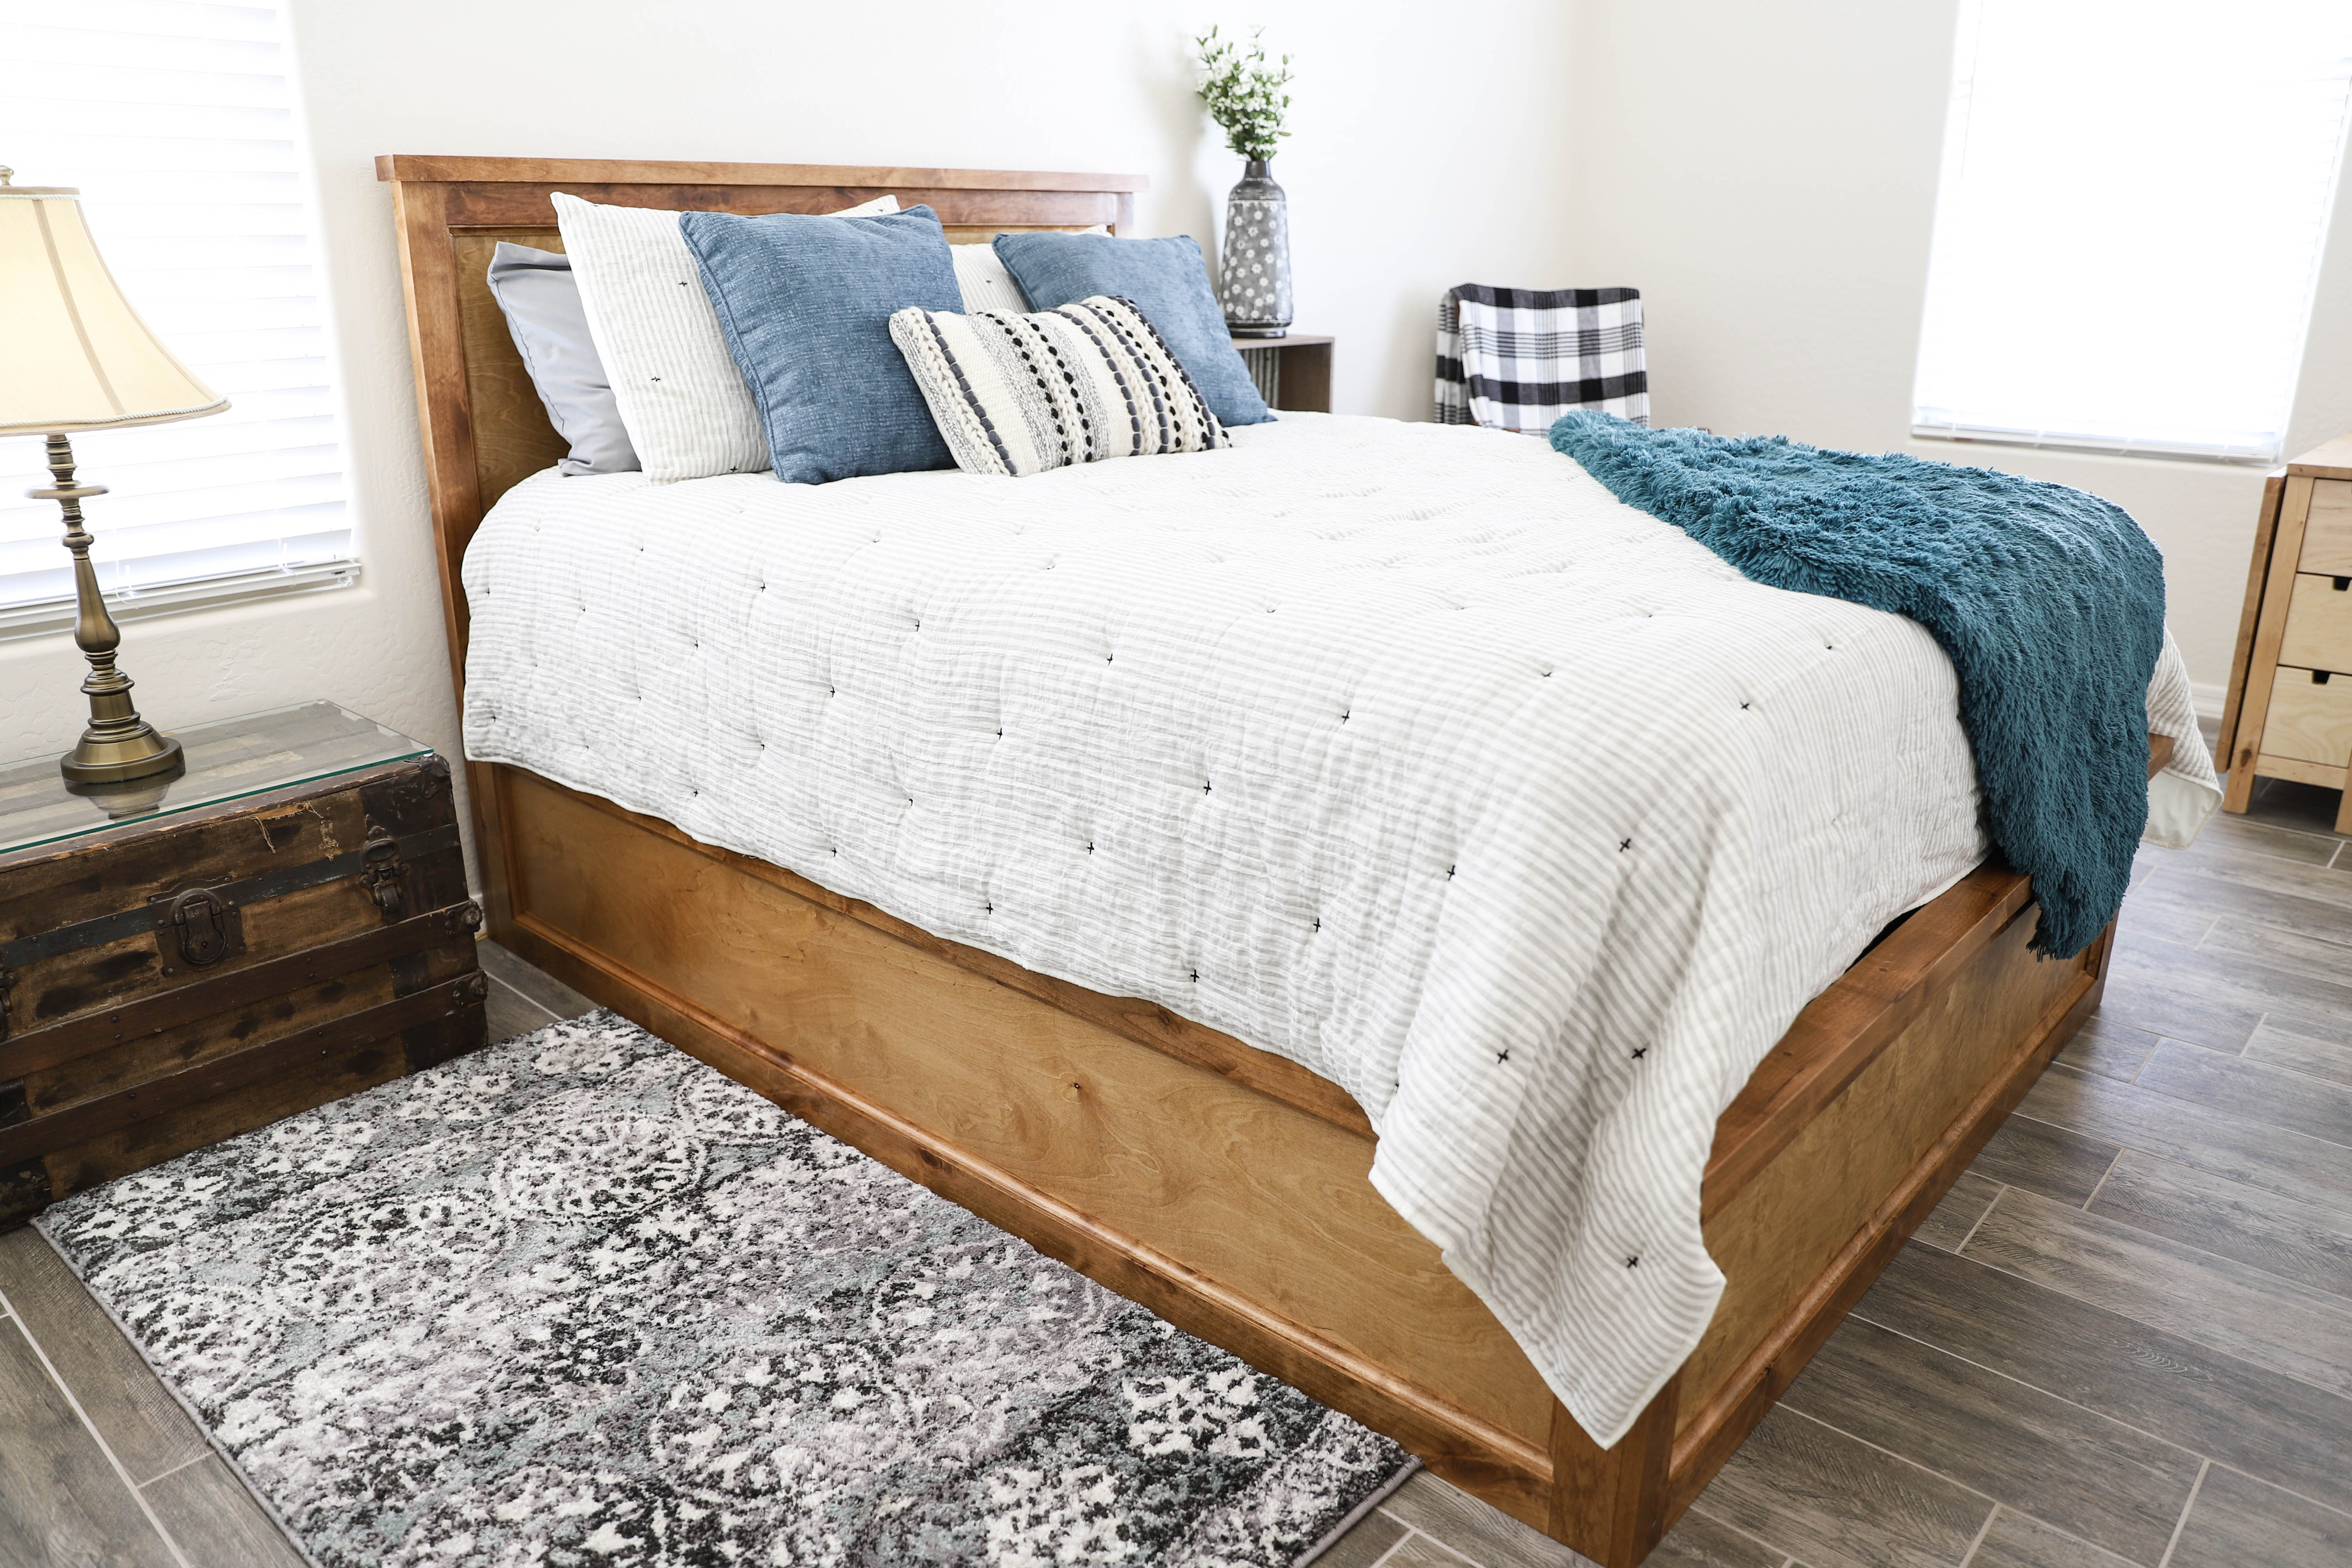 How To Build A Queen Size Storage Bed, How To Build A Bed Frame With Storage